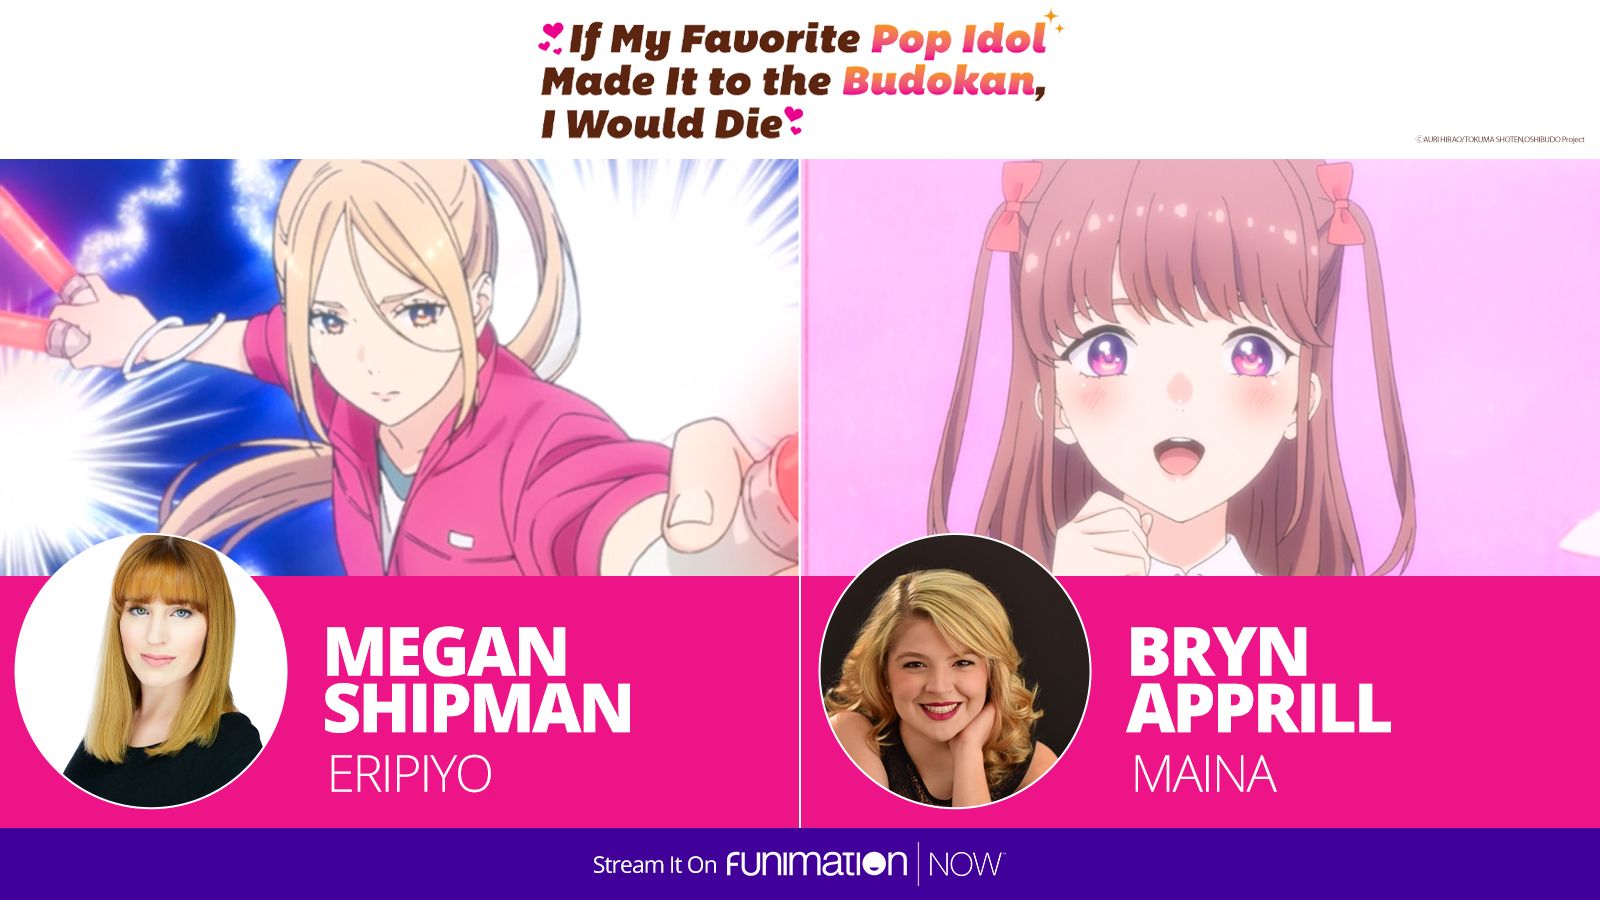 Funimation's Maina's biggest fan, and she'd die